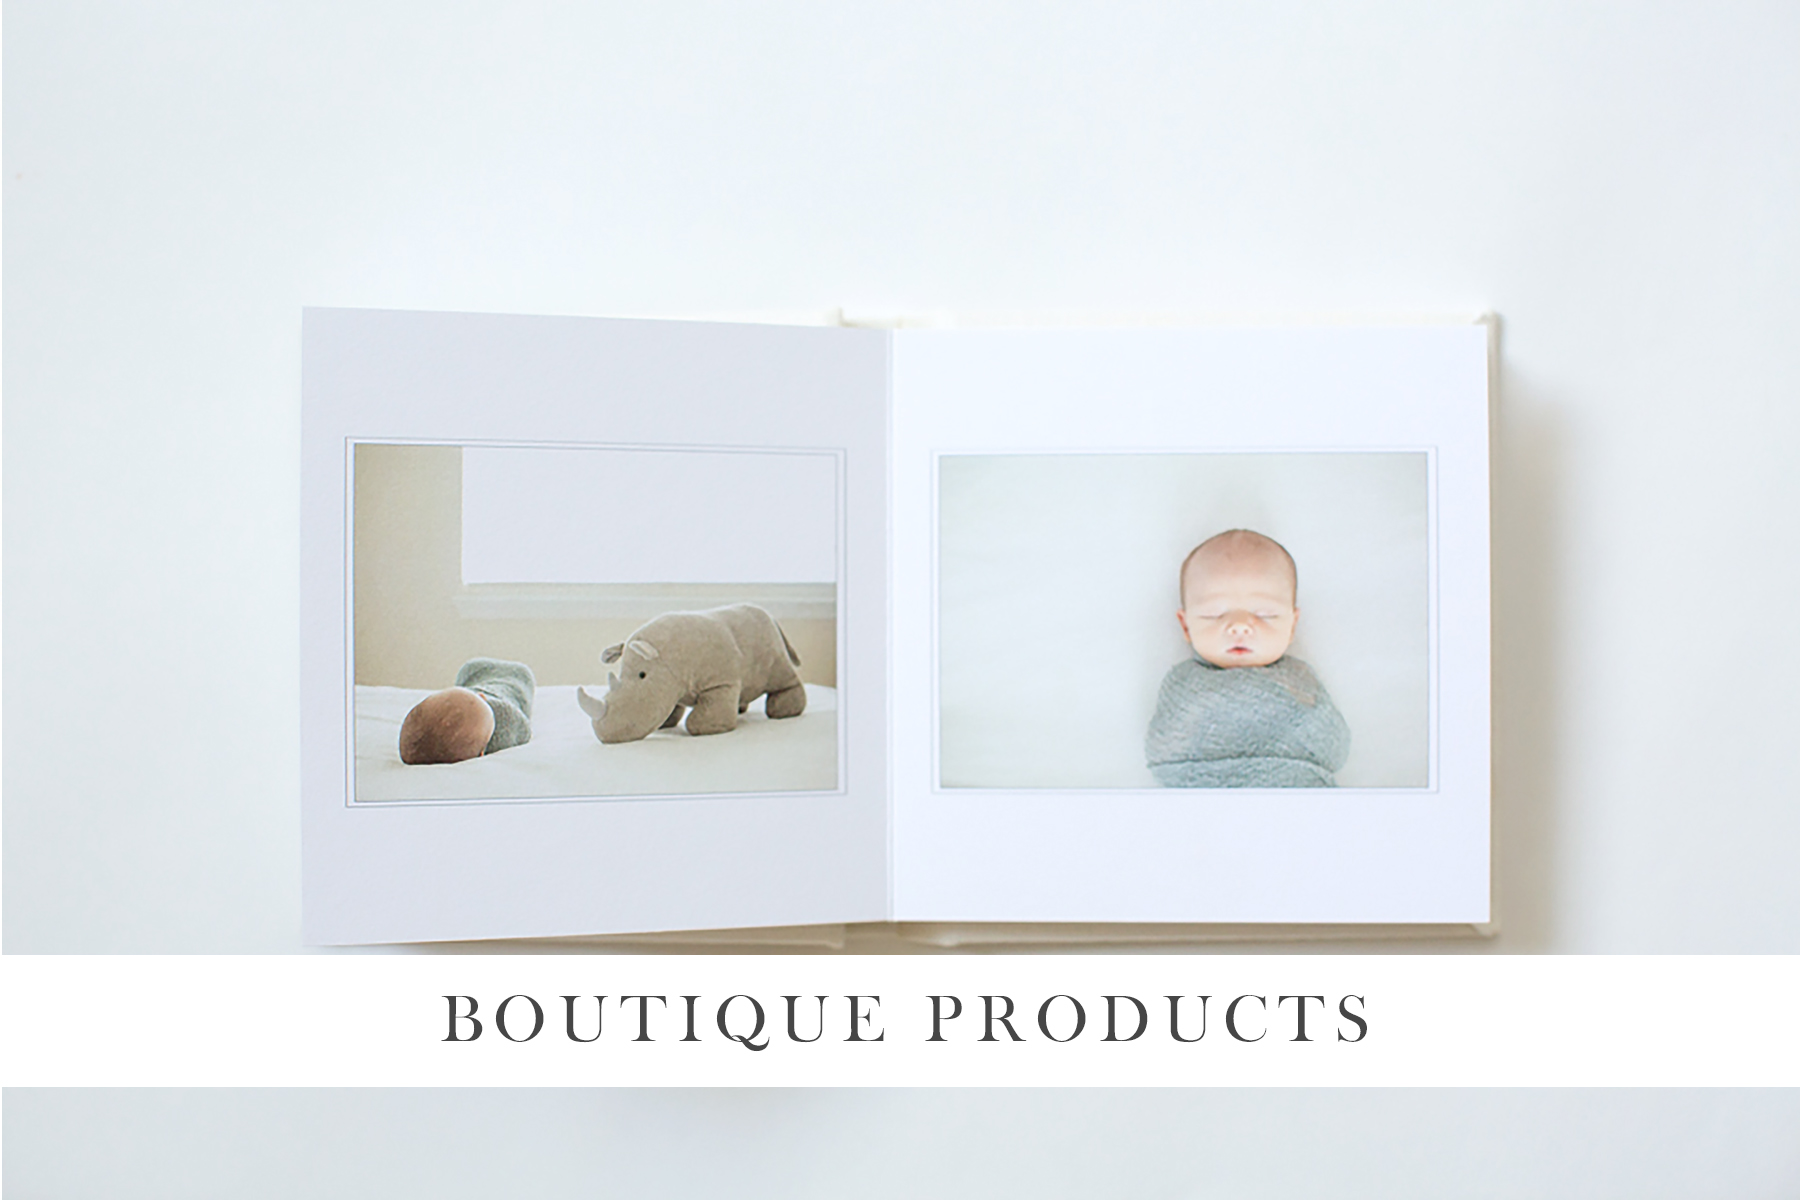 Denver newborn photographer and Boulder family photographer, Jenni Maroney offers custom boutique photography products for her clients.